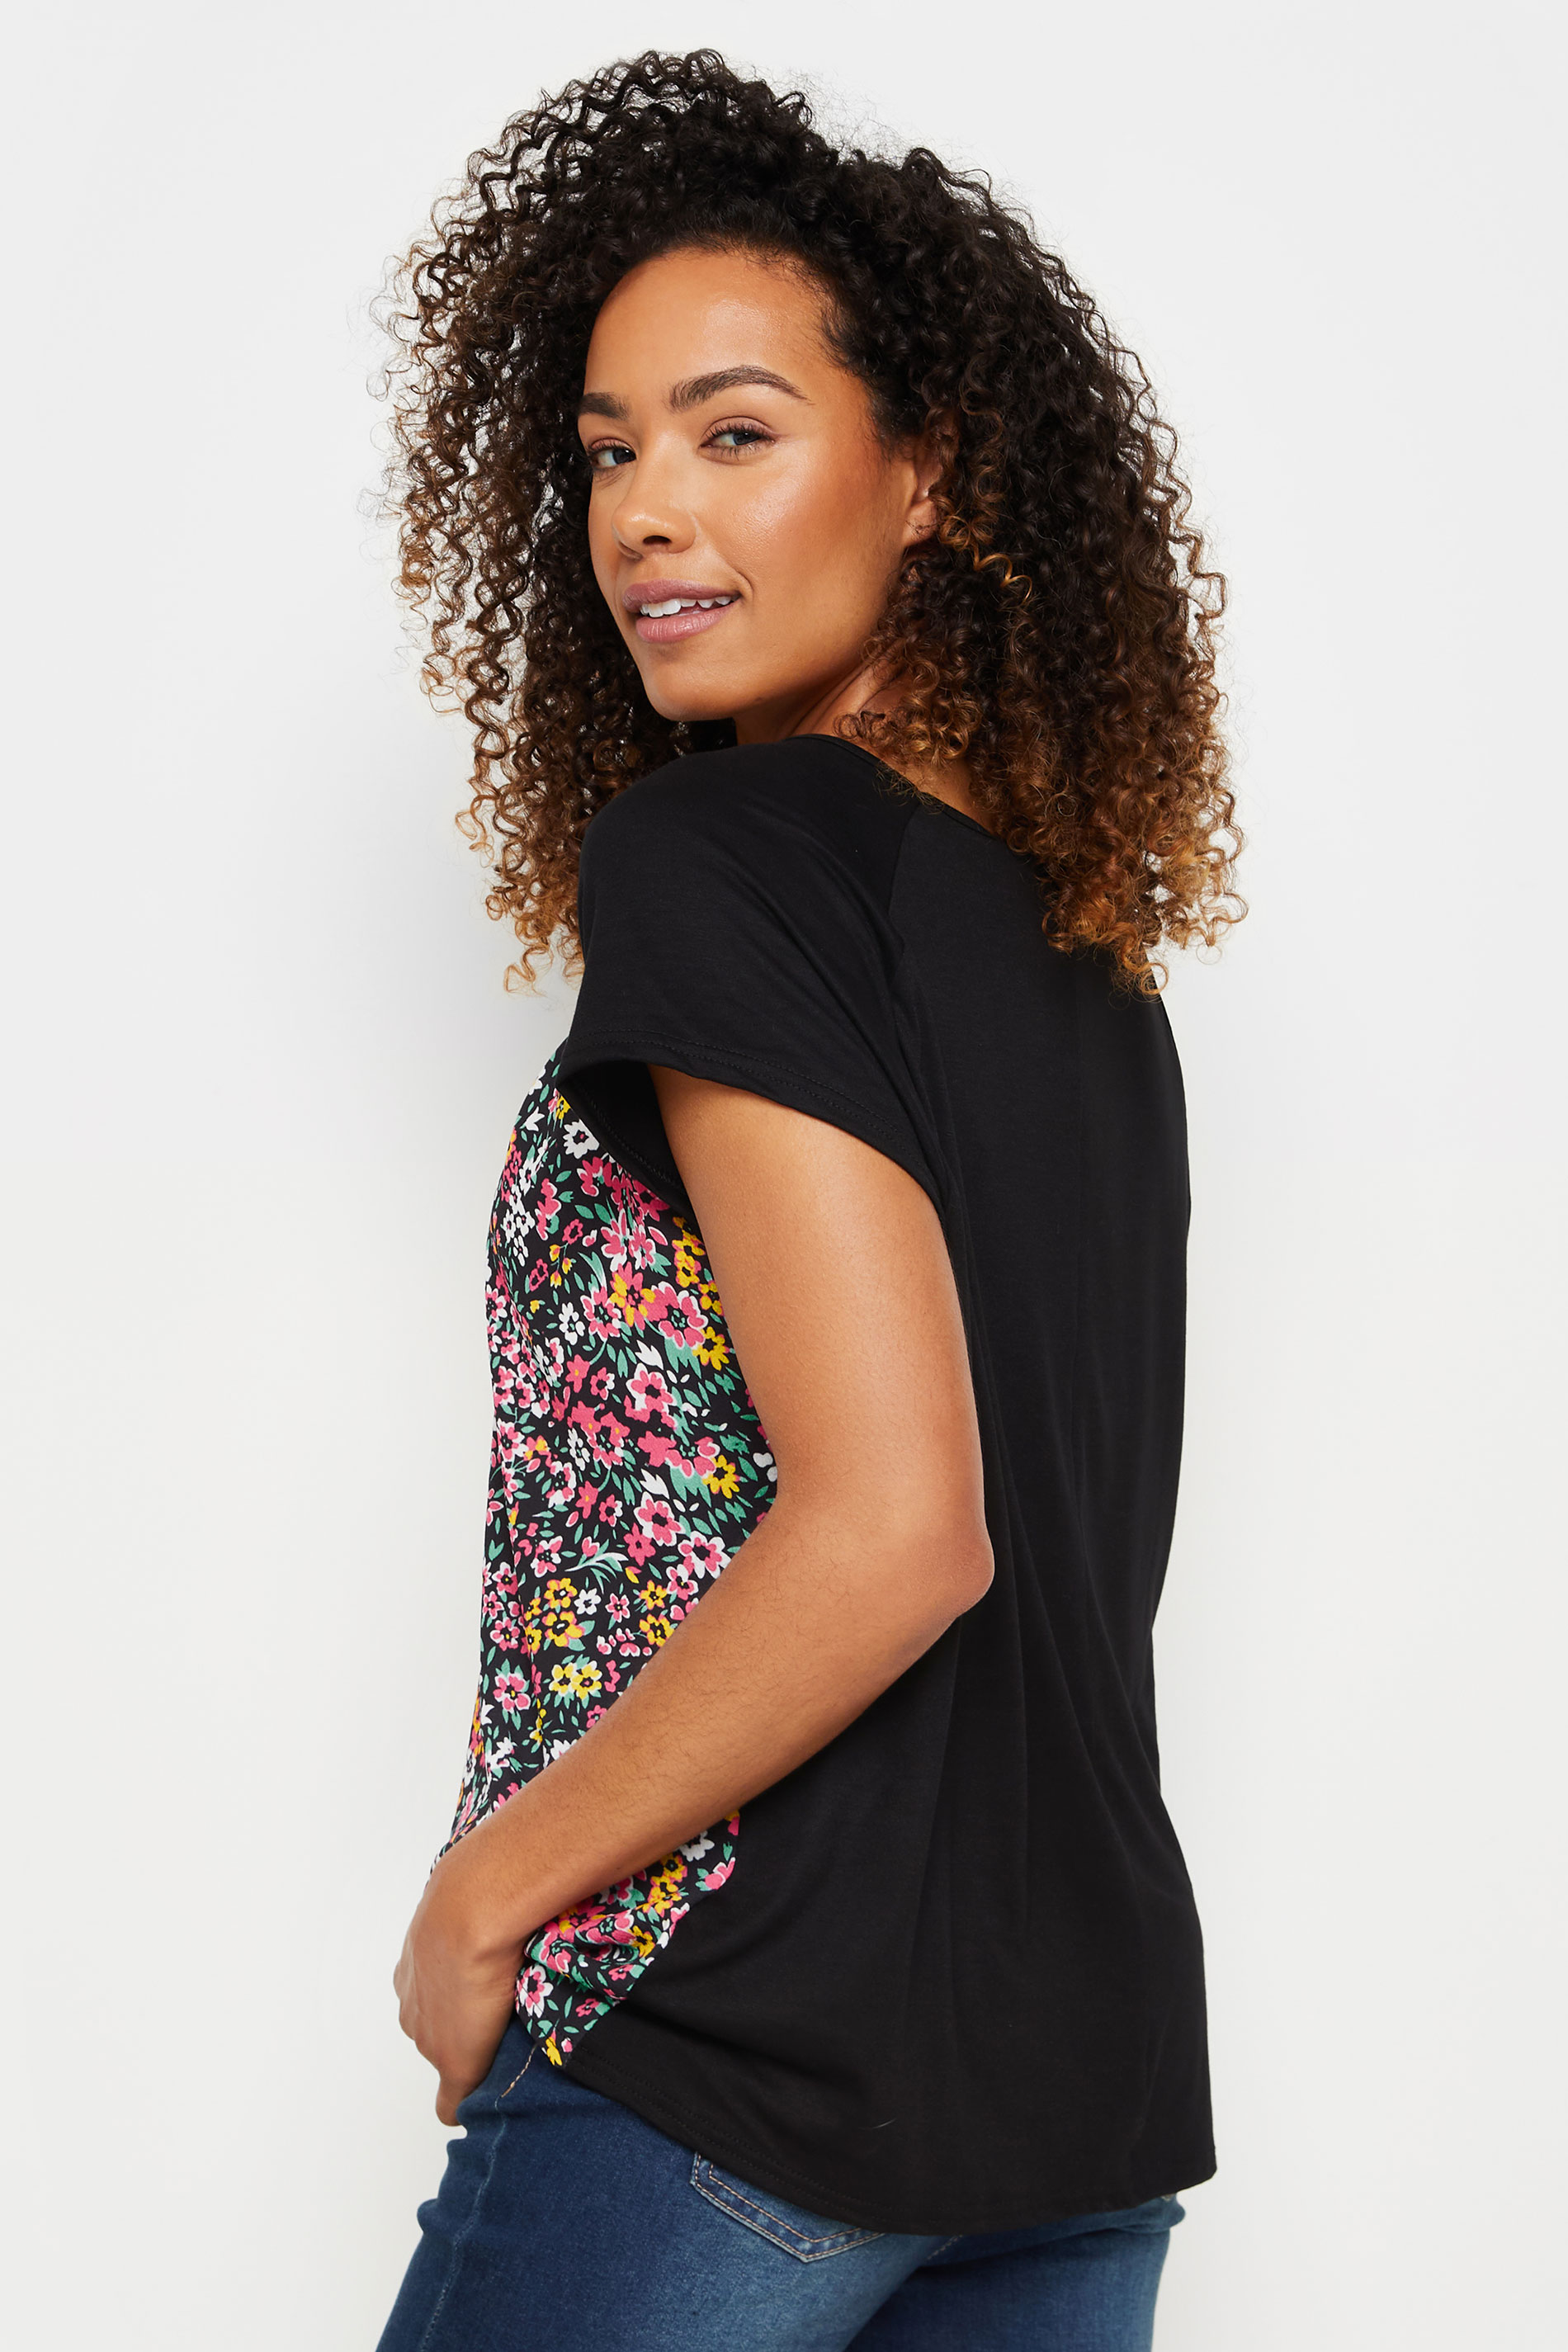 M&Co Black Ditsy Floral Print Short Sleeve Top | M&Co 3